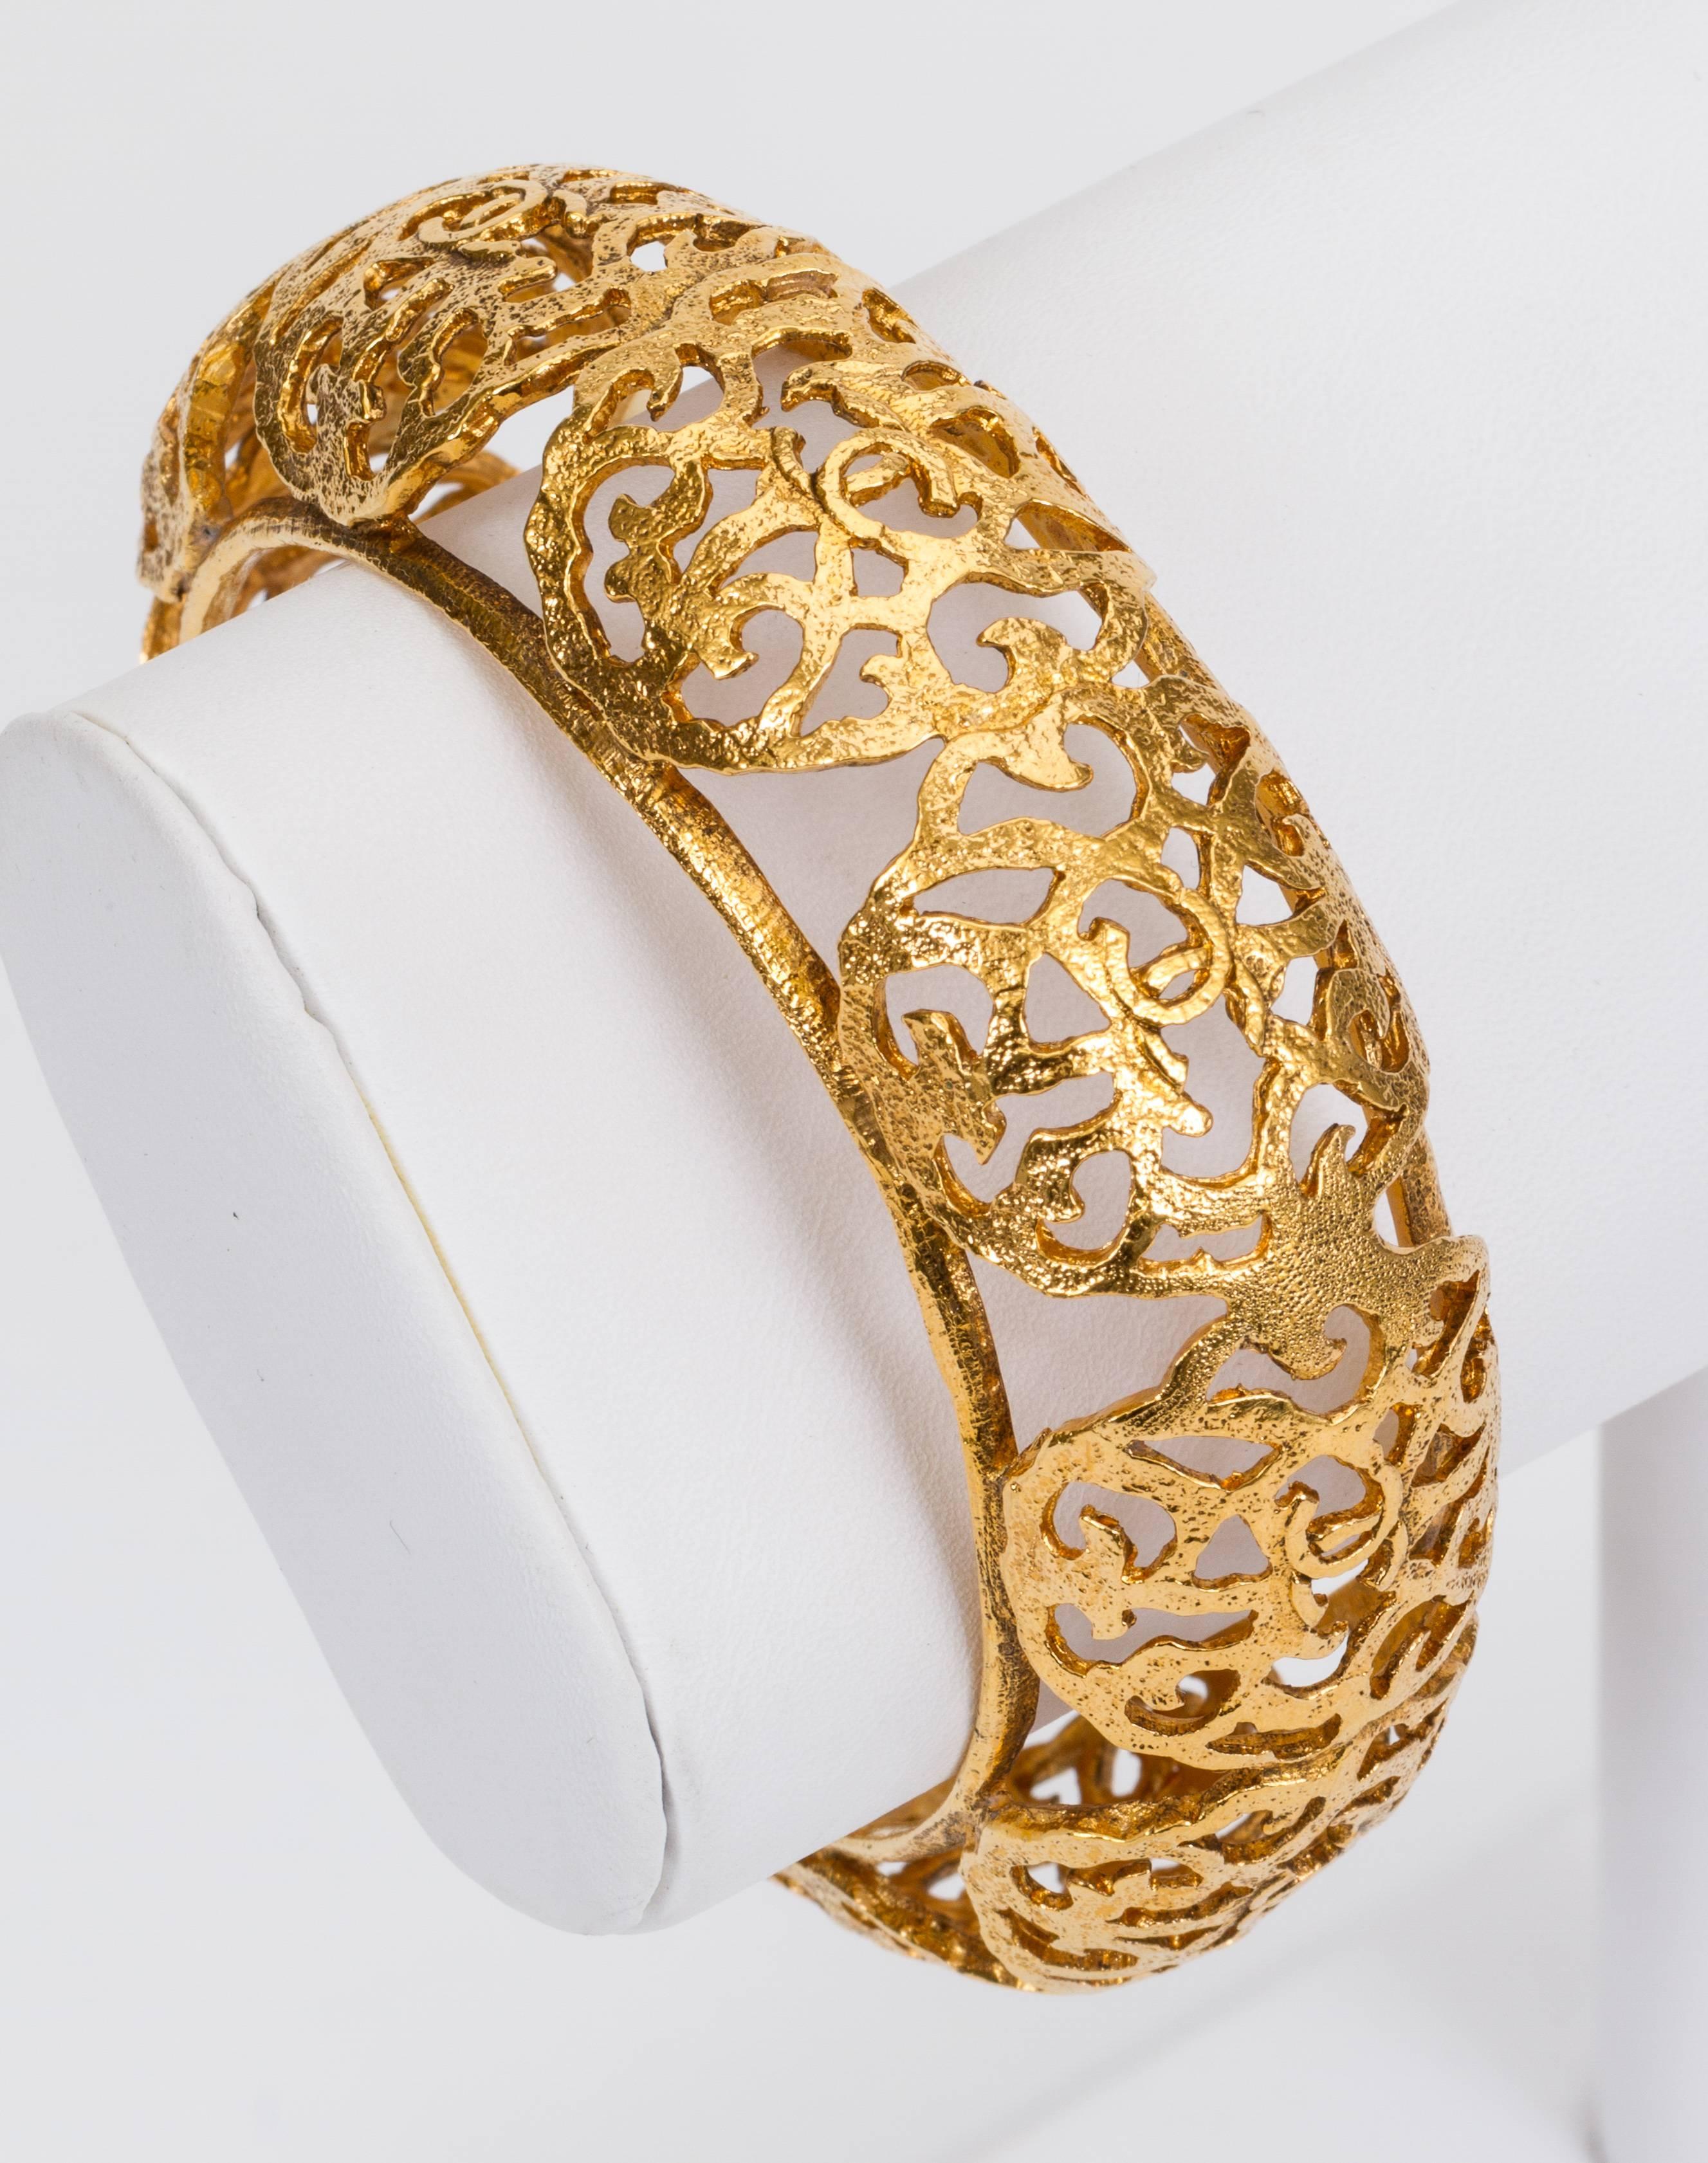 Chanel perforated bangle bracelet. Collection 23, circa 1985. 2.5